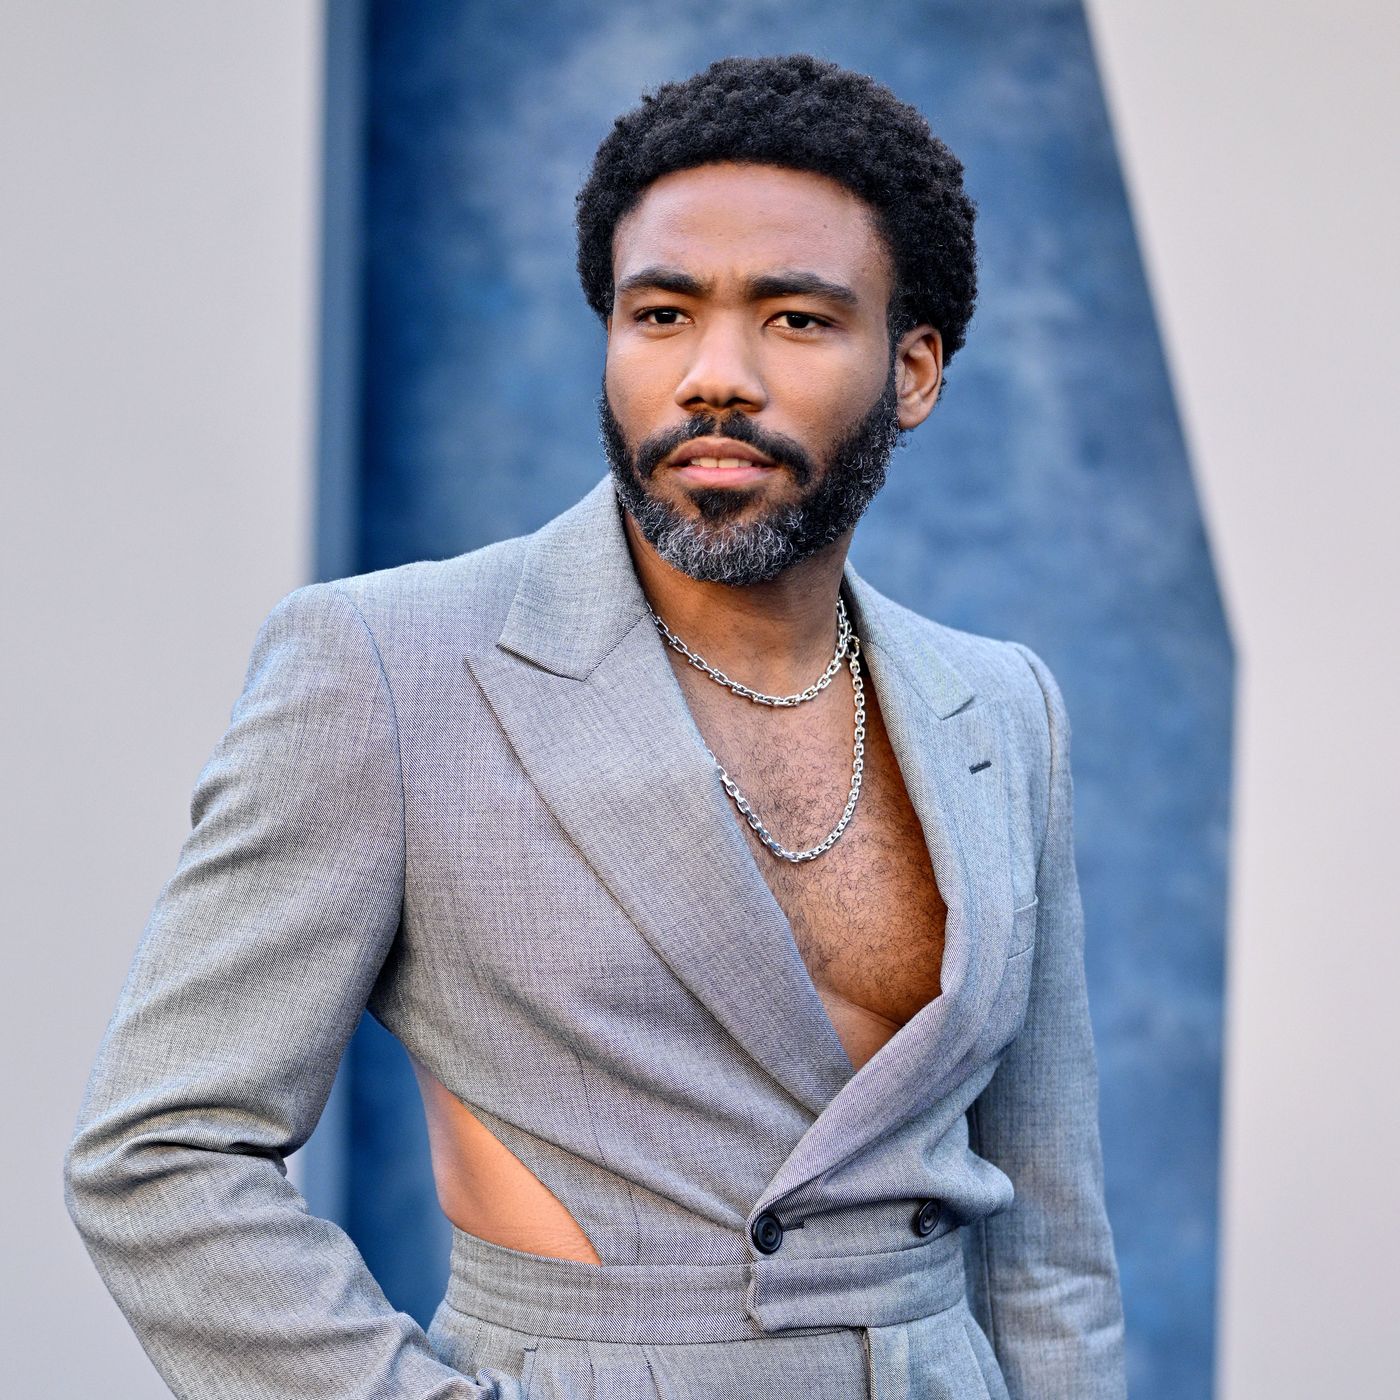 Donald Glover: If I got on SNL, my career wouldn't have happened